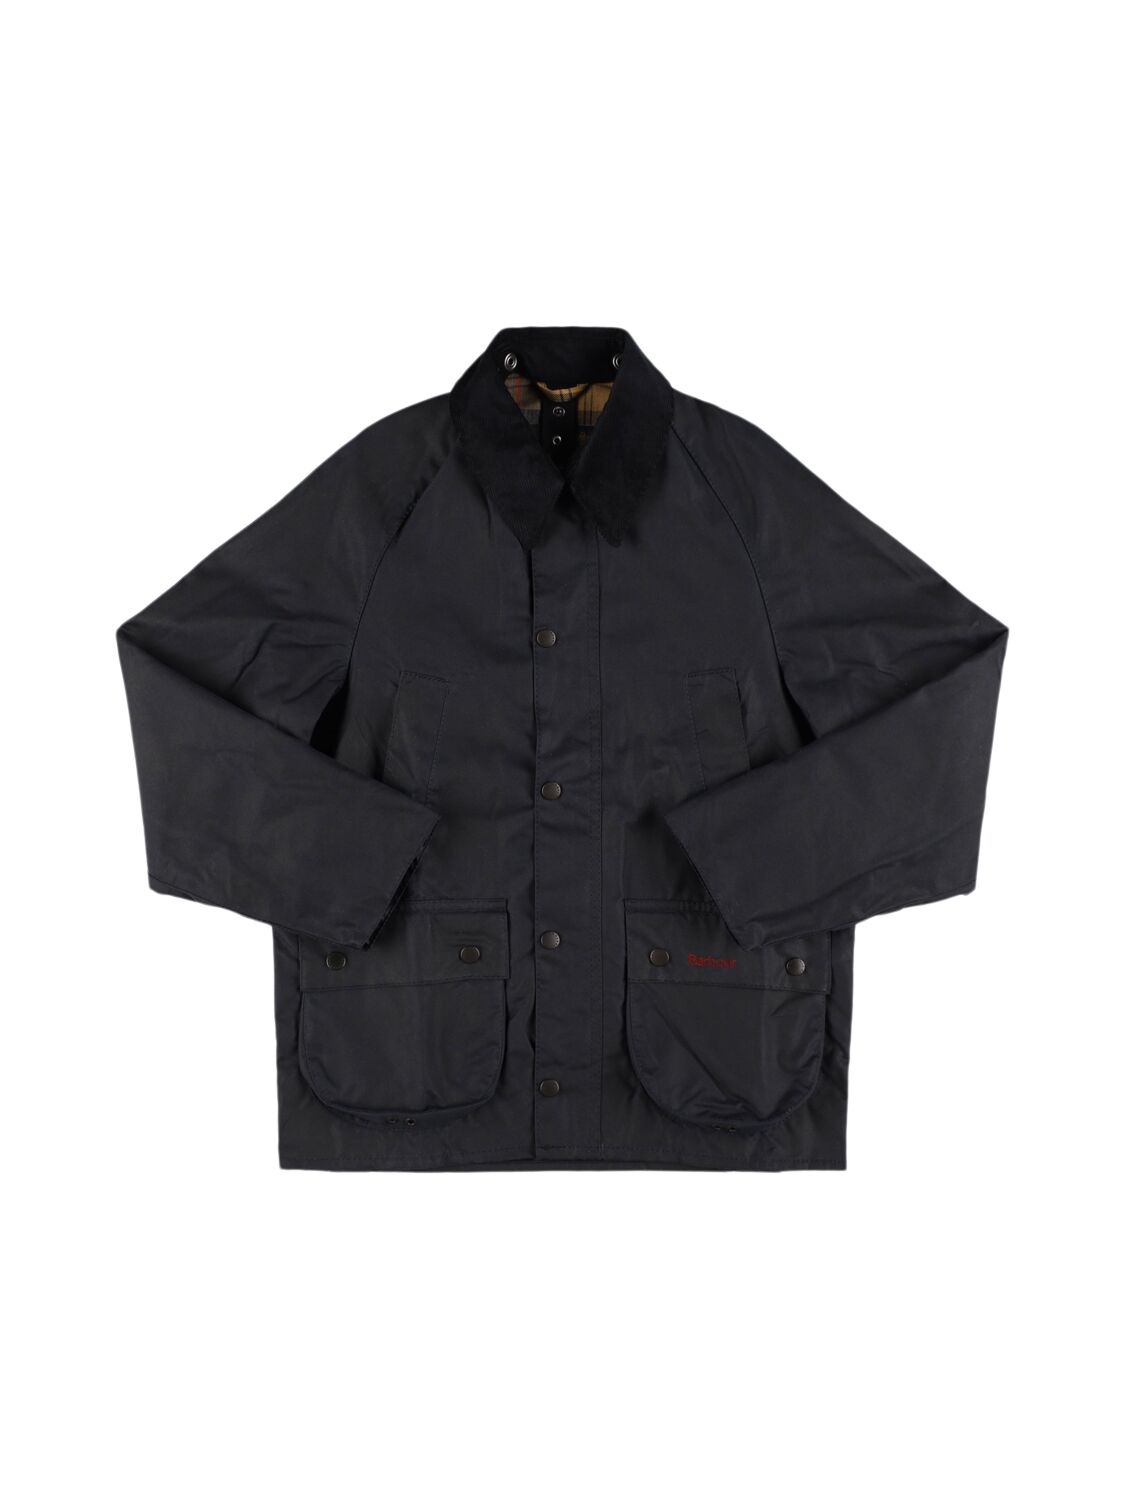 Image of Bedale Waxed Cotton Jacket